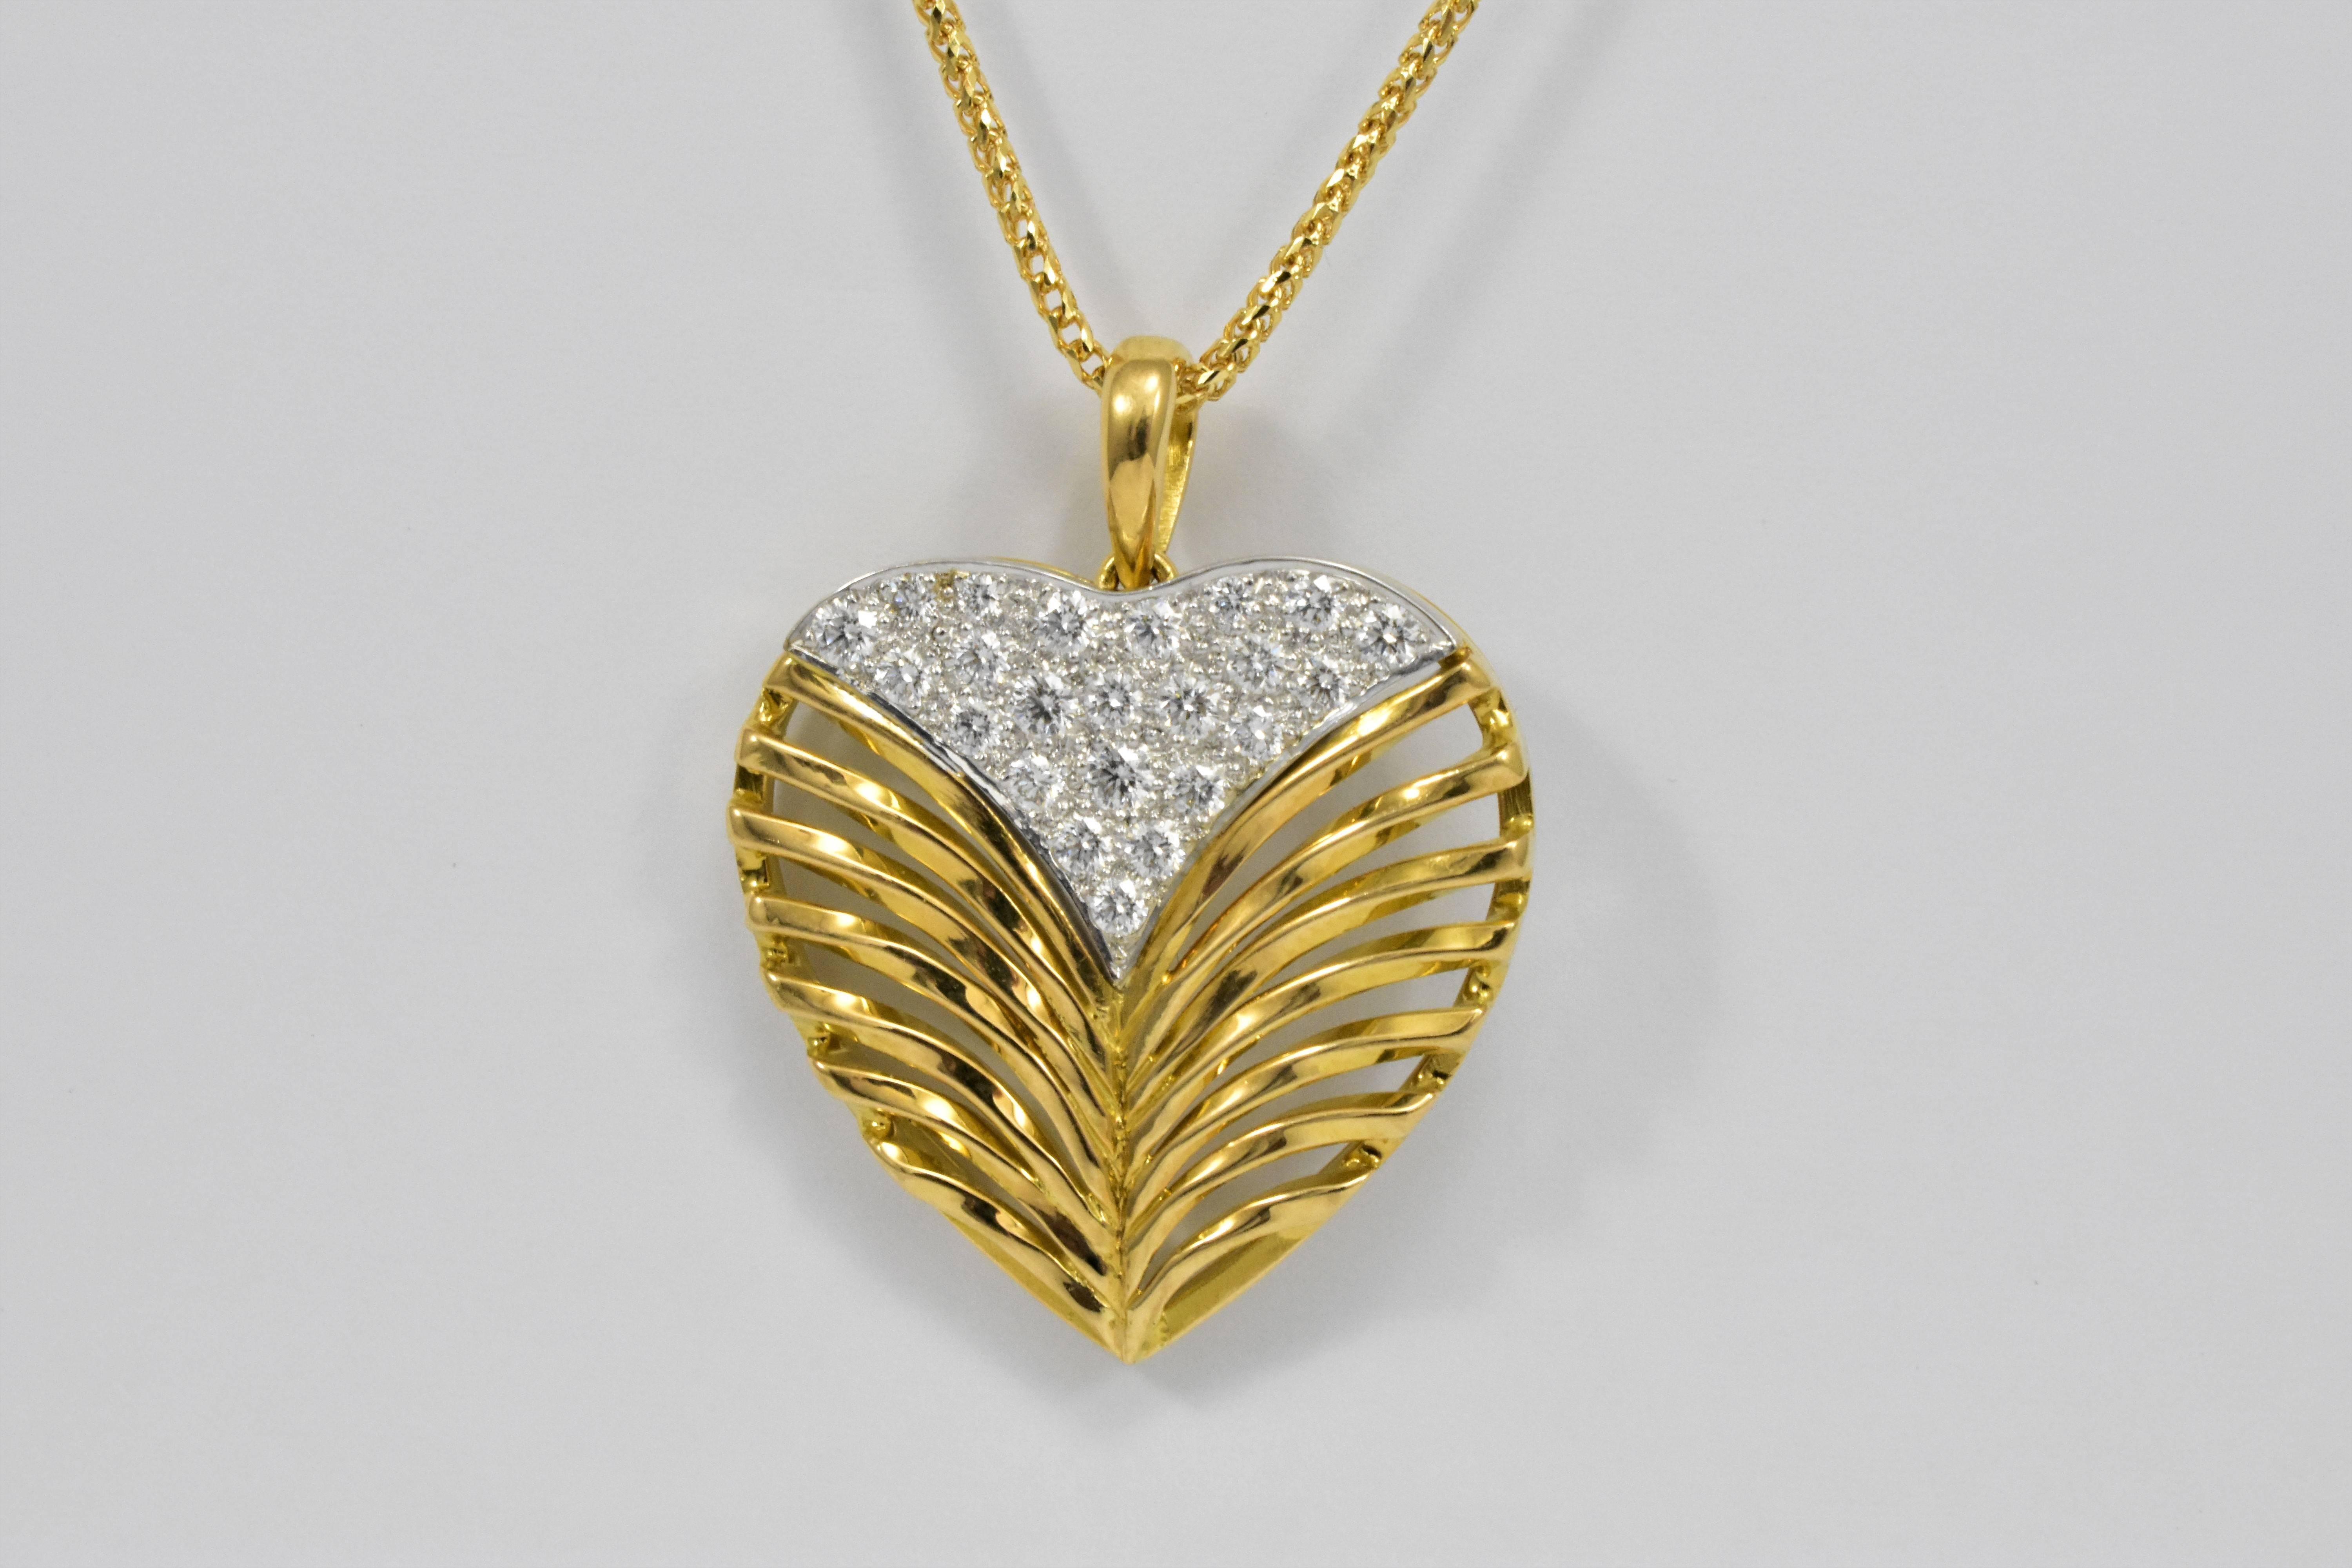 A very distinctive Daou design combining a white gold pavé diamond heart cleft with a sculptural highly polished yellow gold twisted branched leaf pattern. The heart pendant necklace in 18 karat yellow gold is set with round brilliant diamonds and